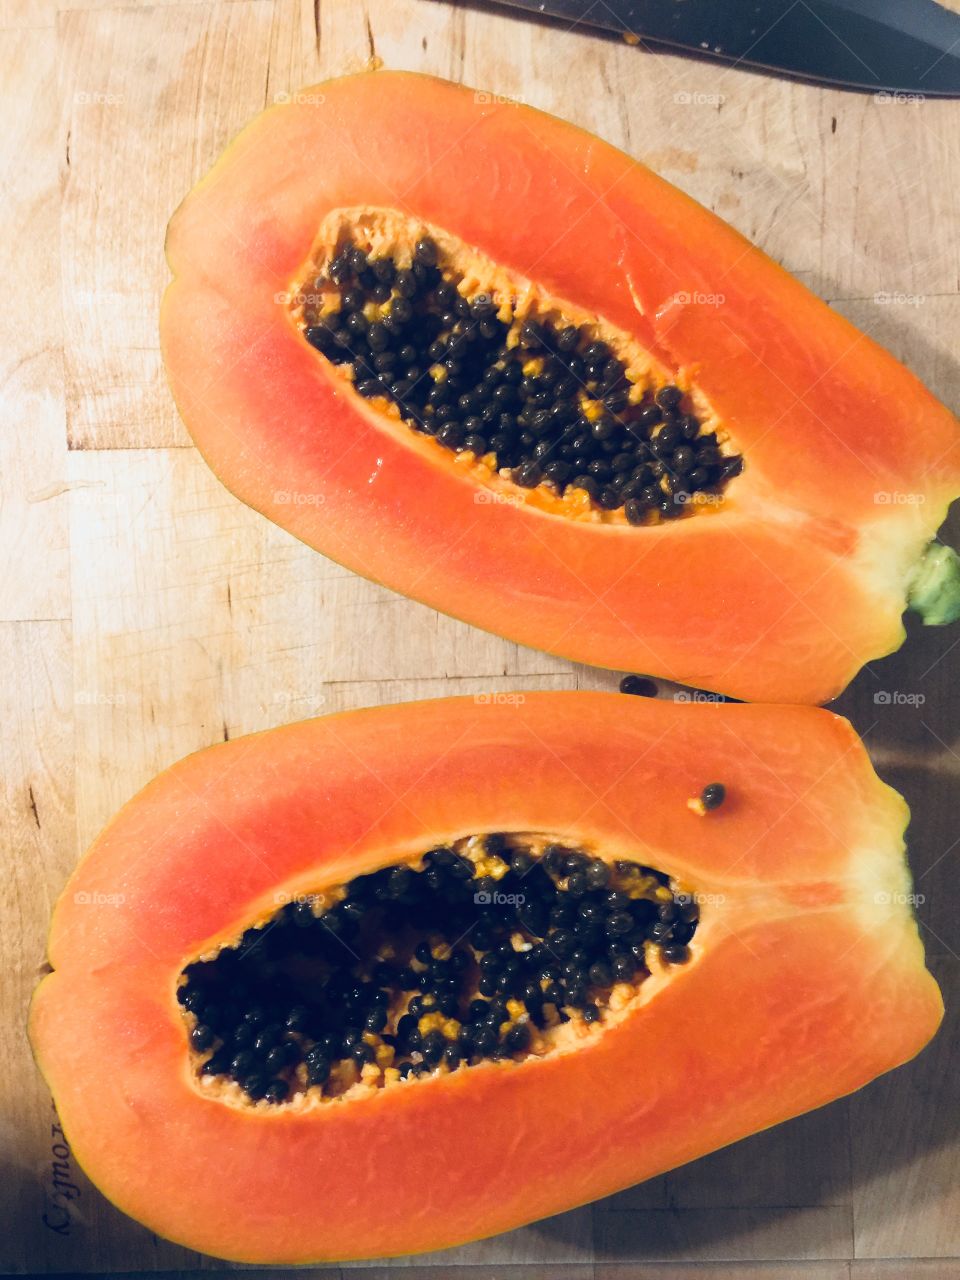 Mexican papaya cut in half. Seeds still inside the fruit. Both halves resting on a wooden surface.